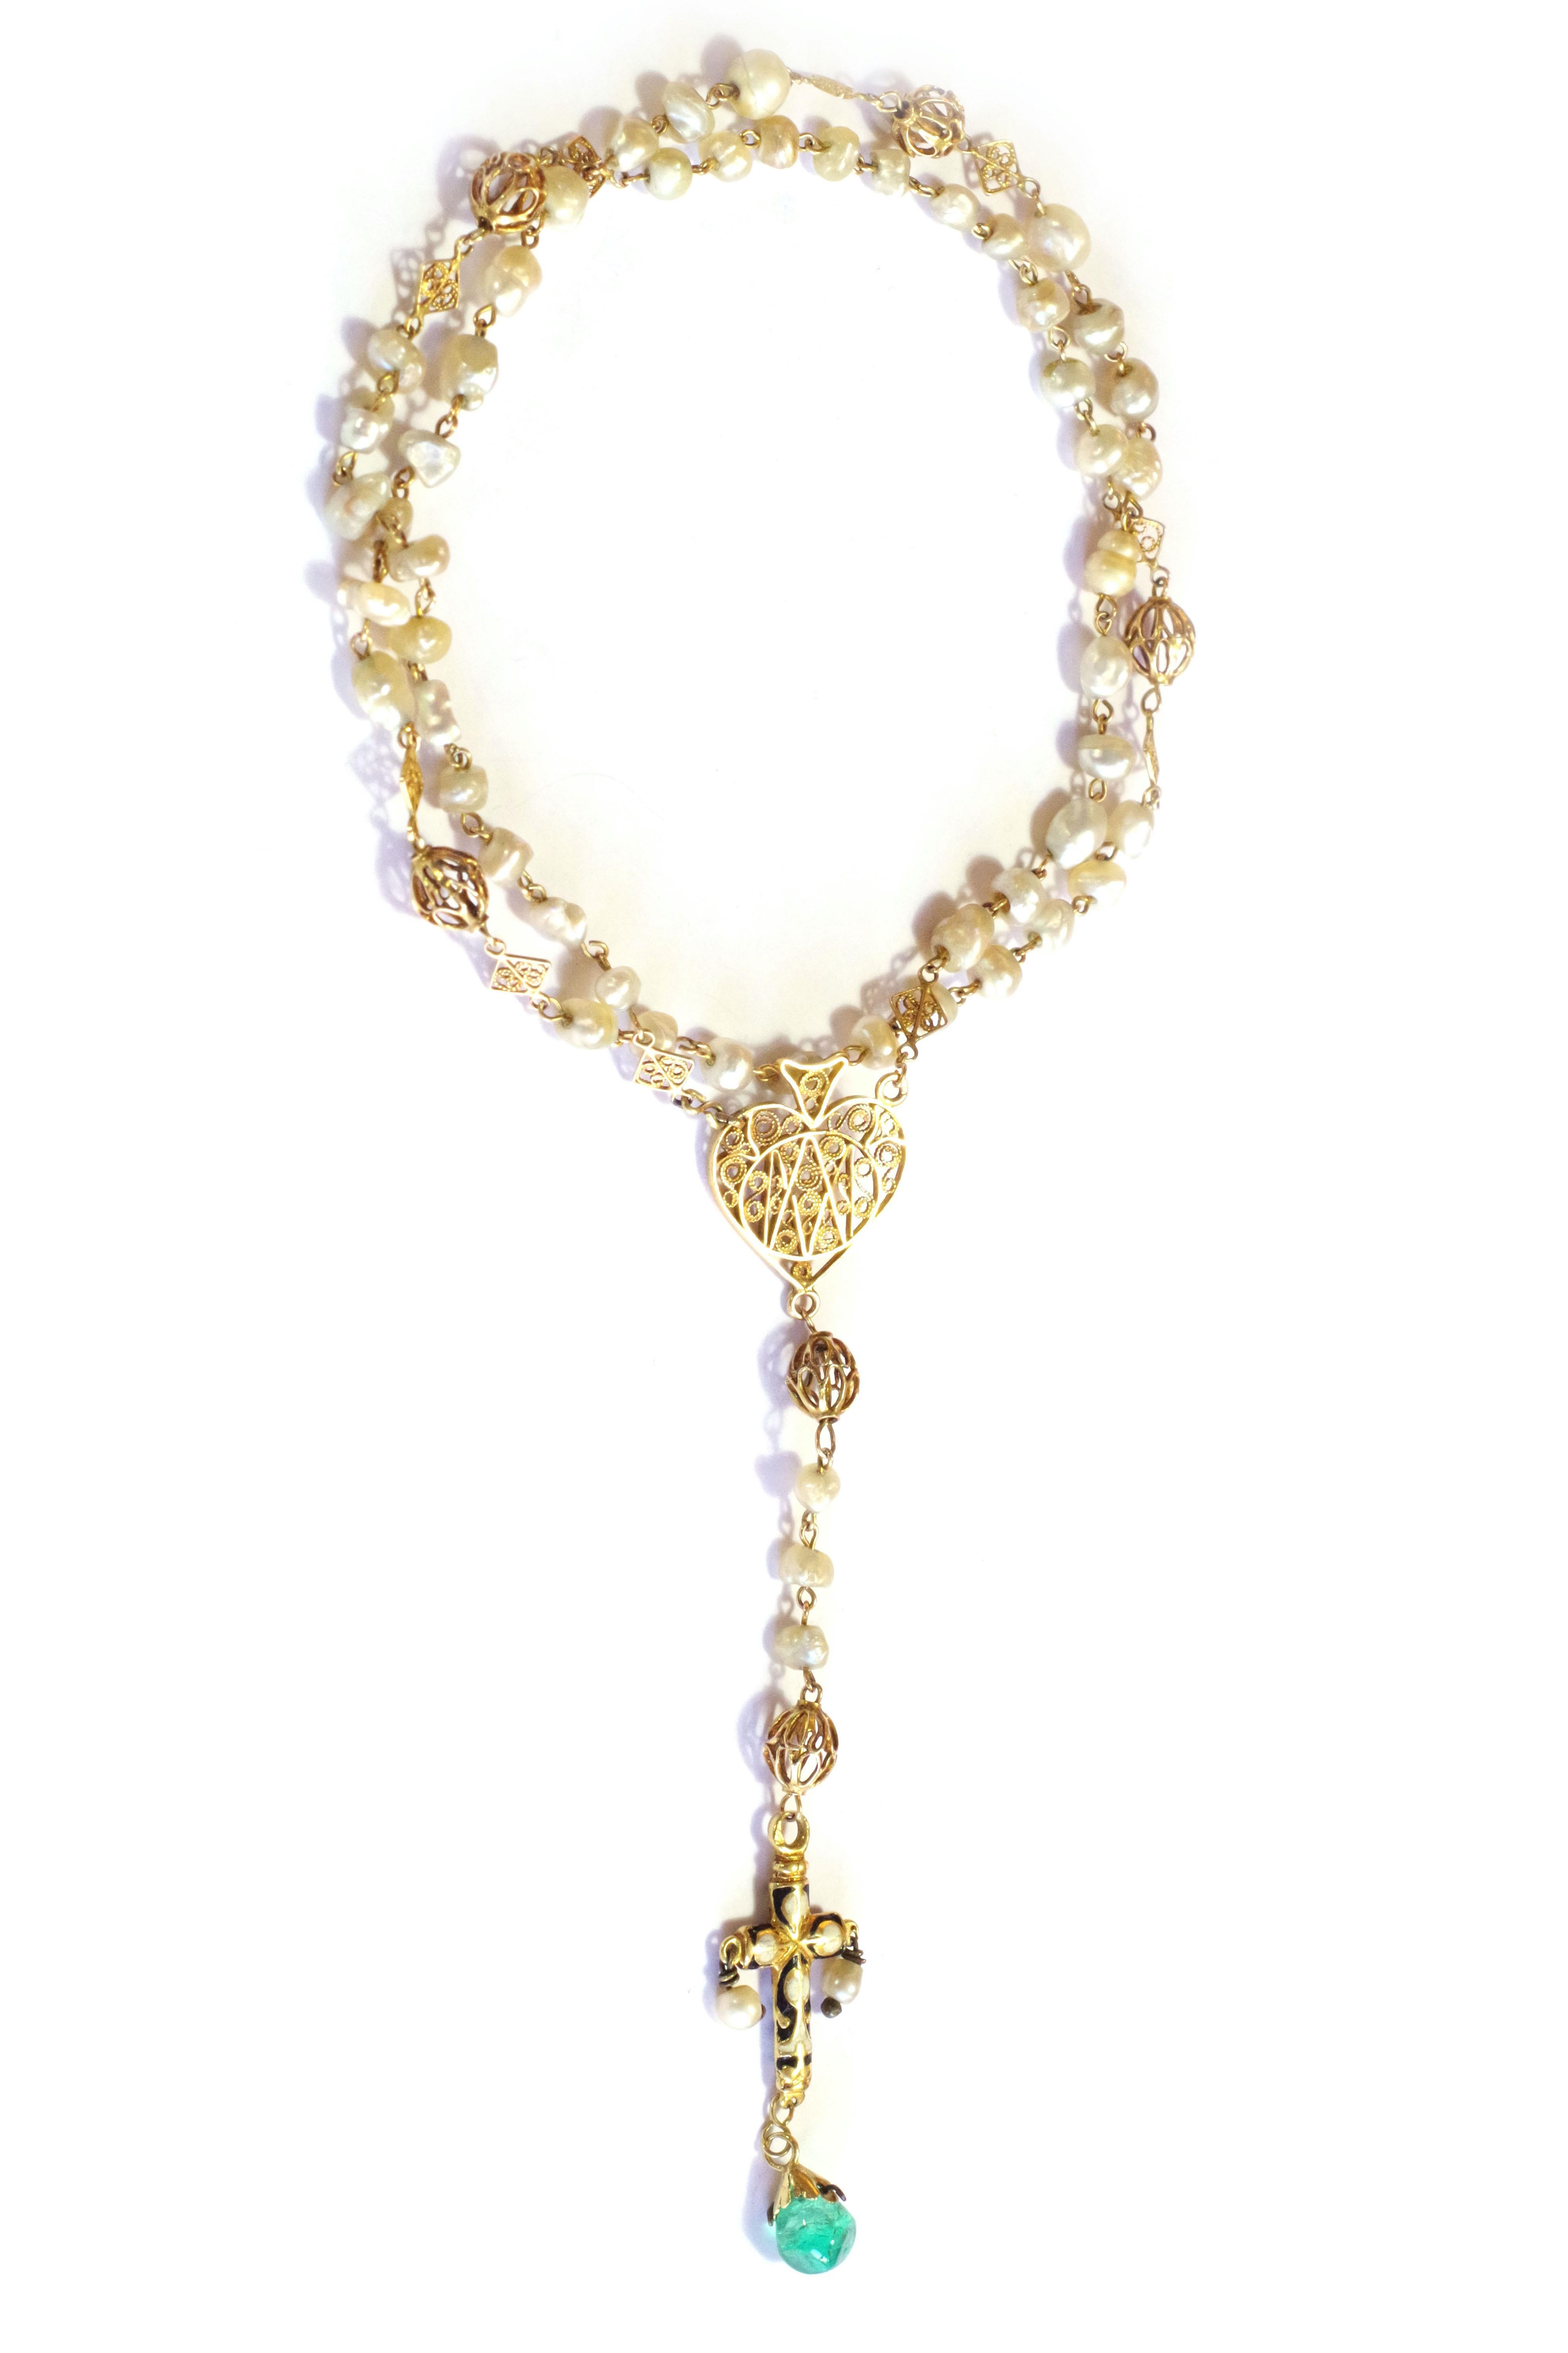 Enamelled gold emerald rosary in 18 karat yellow gold. The rosary is in yellow gold with natural baroque pearls alternating with an openwork spherical element and filigree motifs. The cross is black and white enamelled and enriched with two pendant